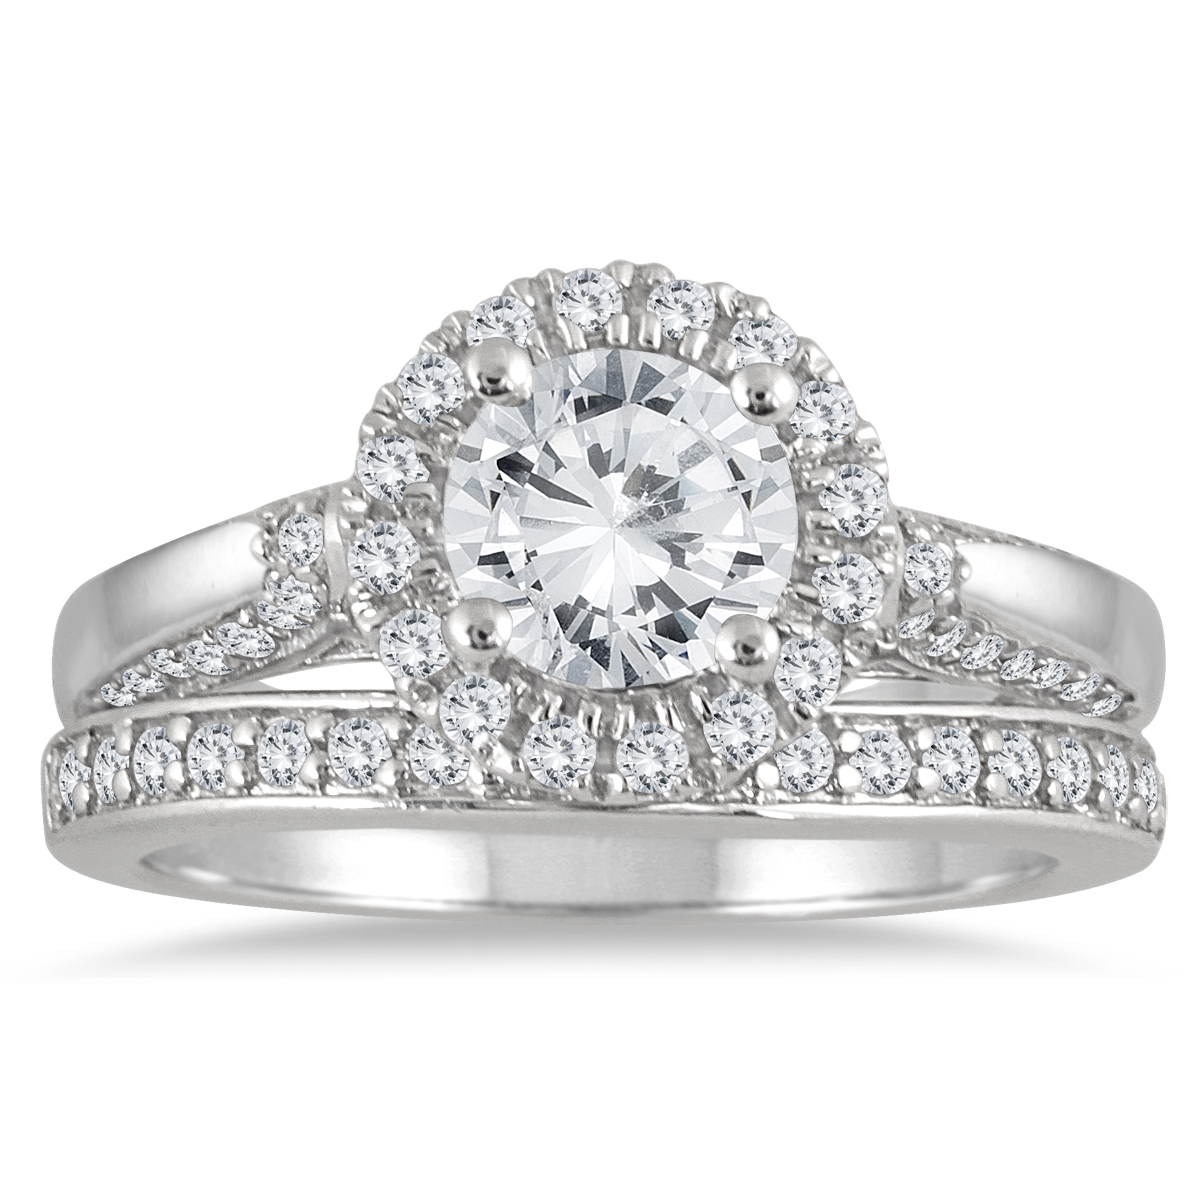 Image of AGS Certified 1 2/3 Carat TW Diamond Halo Bridal Set in 14K White Gold (J-K Color I2-I3 Clarity)